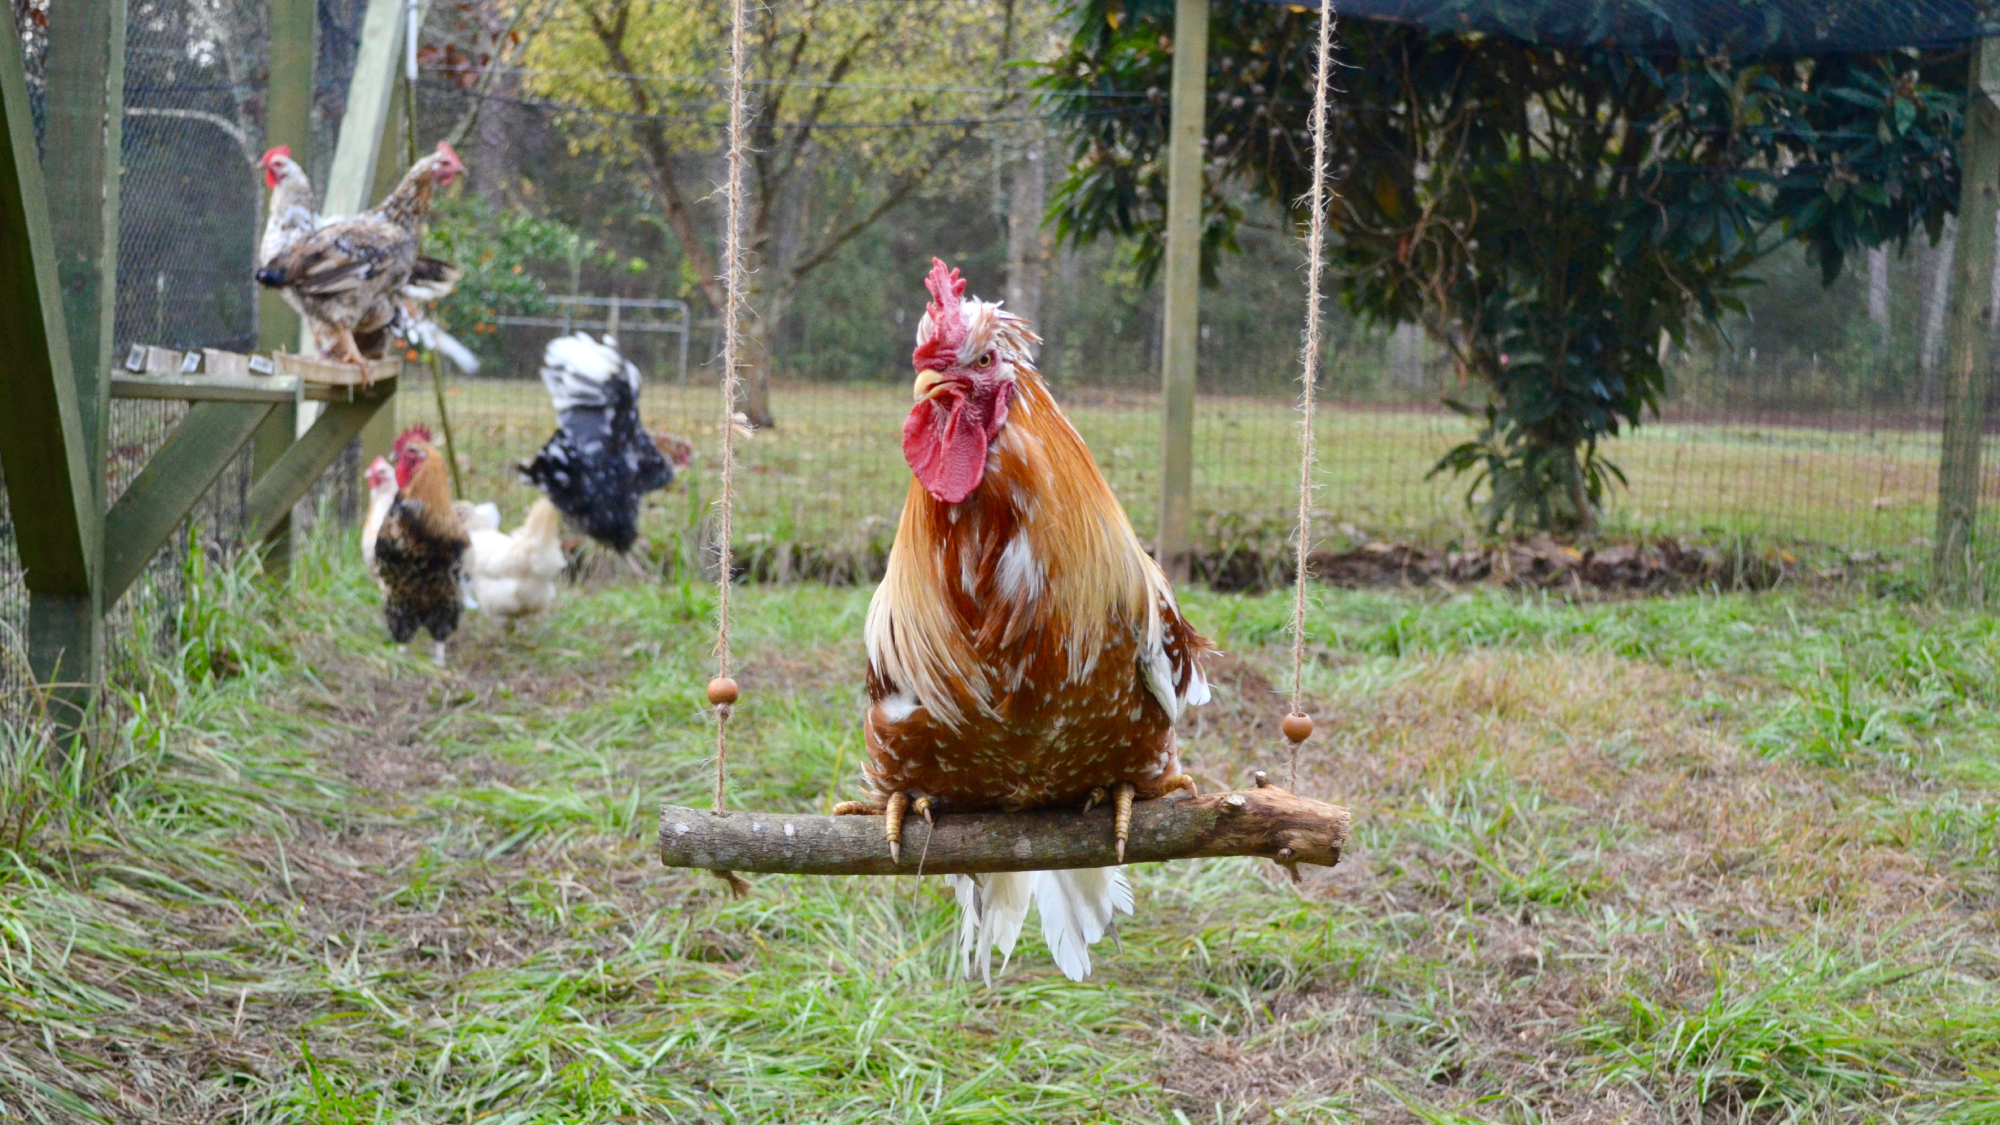 A brown rooster perched on a DIY chicken swing inside a chicken coop yard.